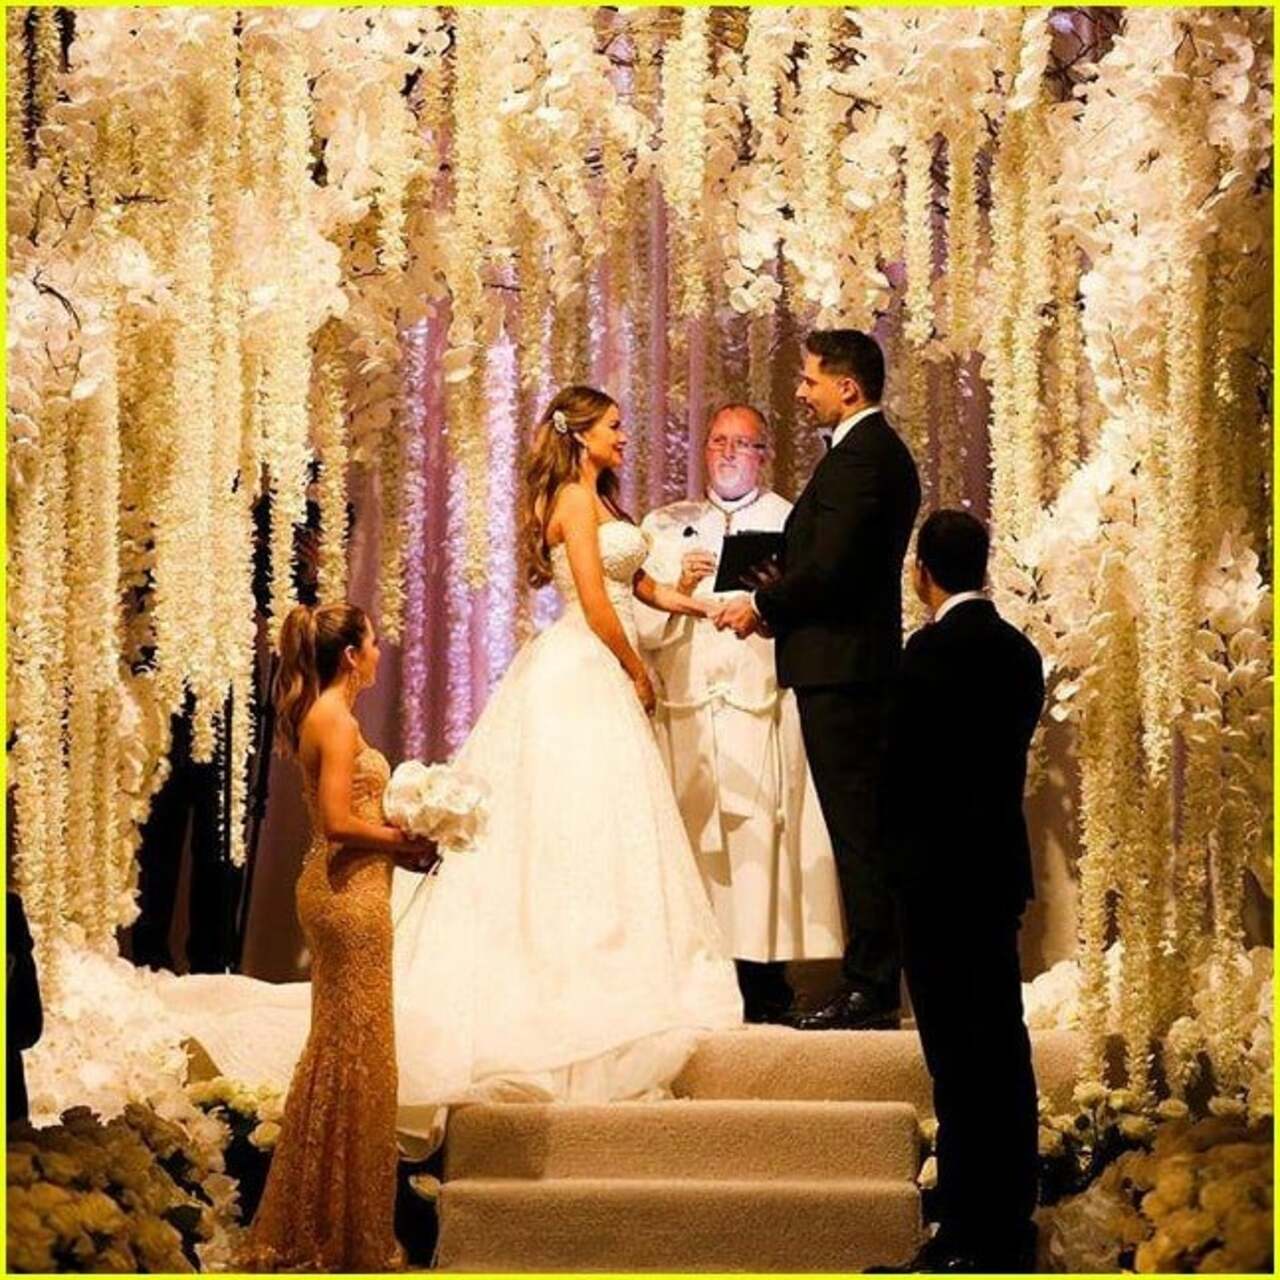 Sofia Vergara and Joe Manganiello wed in 2015 at The Breakers in Palm Beach, Florida. Sofia wore a custom couture number by red carpet mainstay Zuhair Murad - the master of glittery gowns. It was a strapless mermaid gown that came with a detachable over-skirt. 